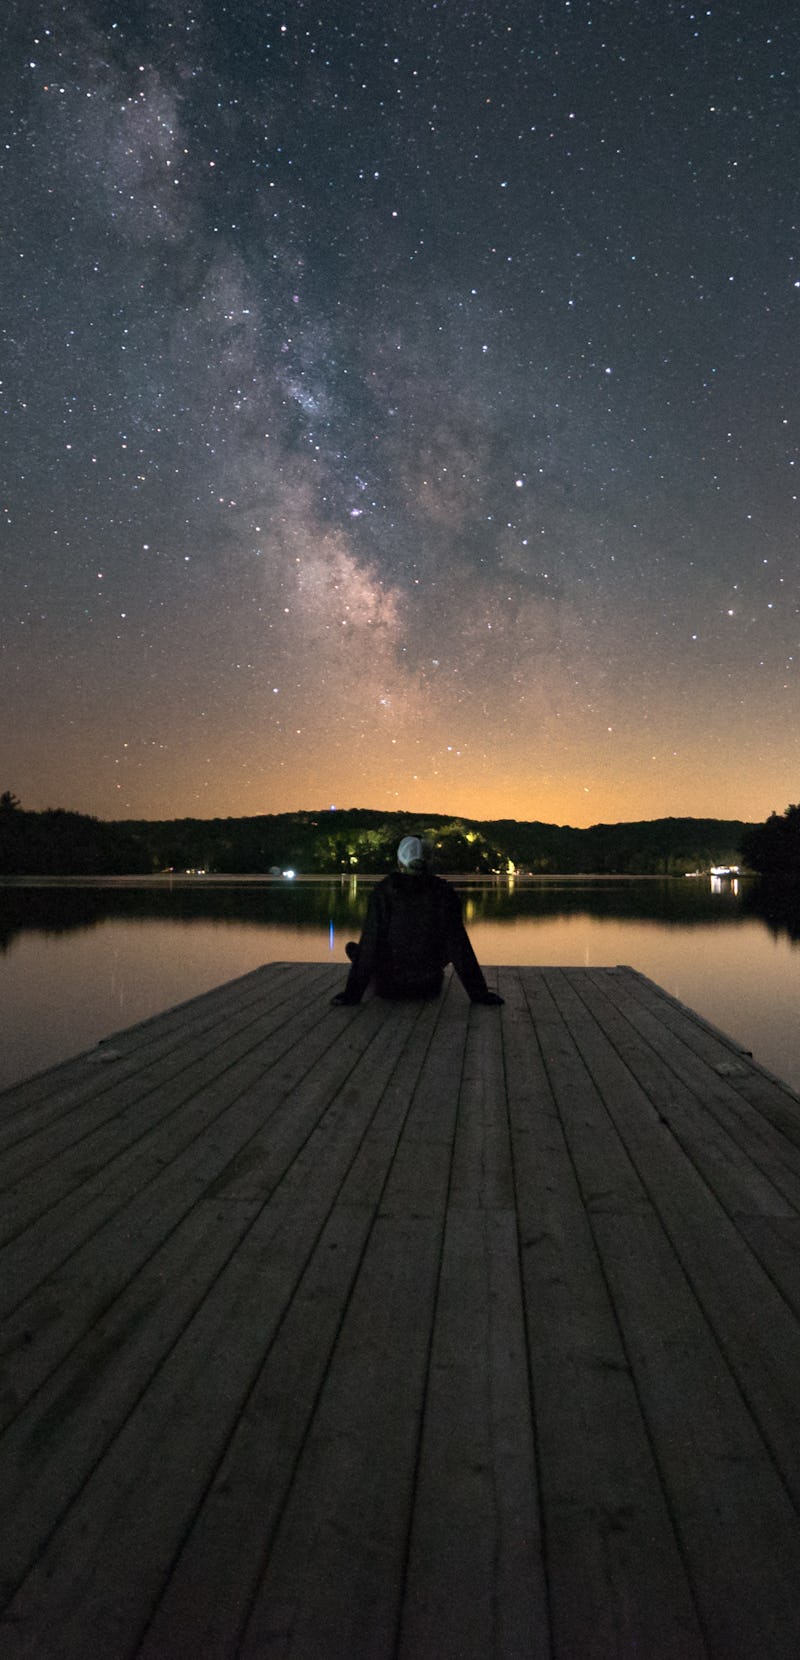 Man stargazing at the end of a dock in Muskoka, Ontario, Canada.